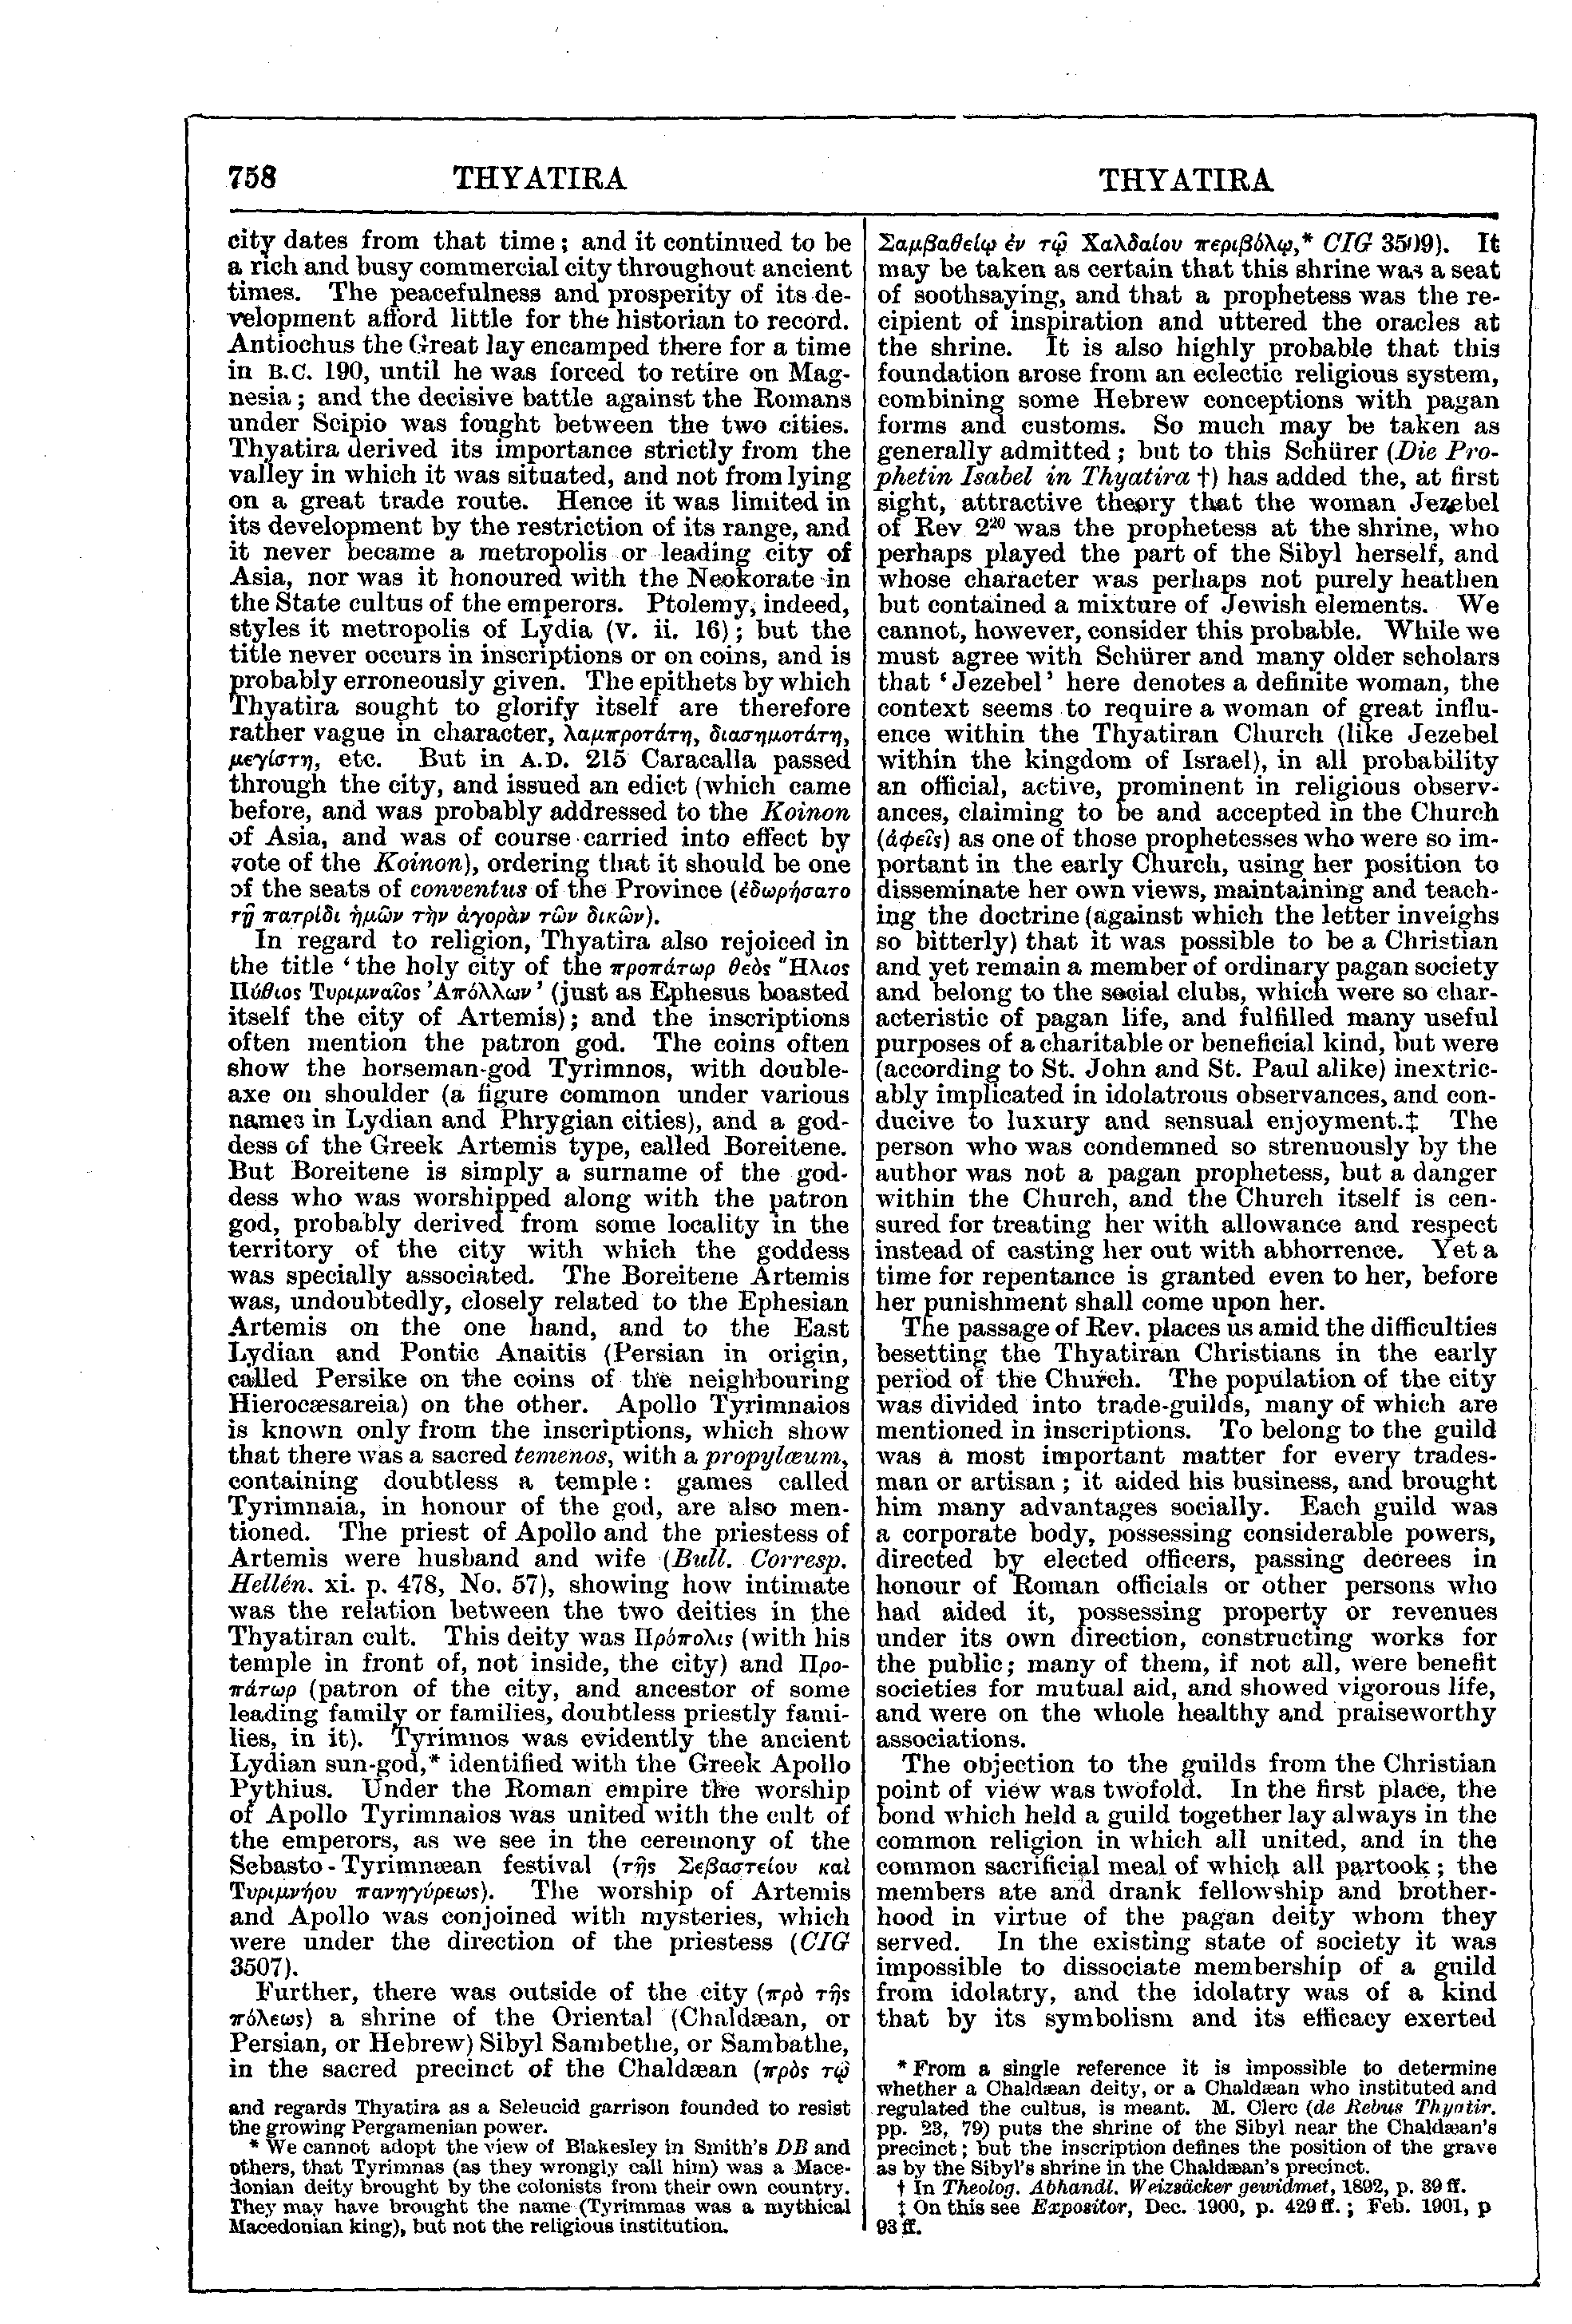 Image of page 758